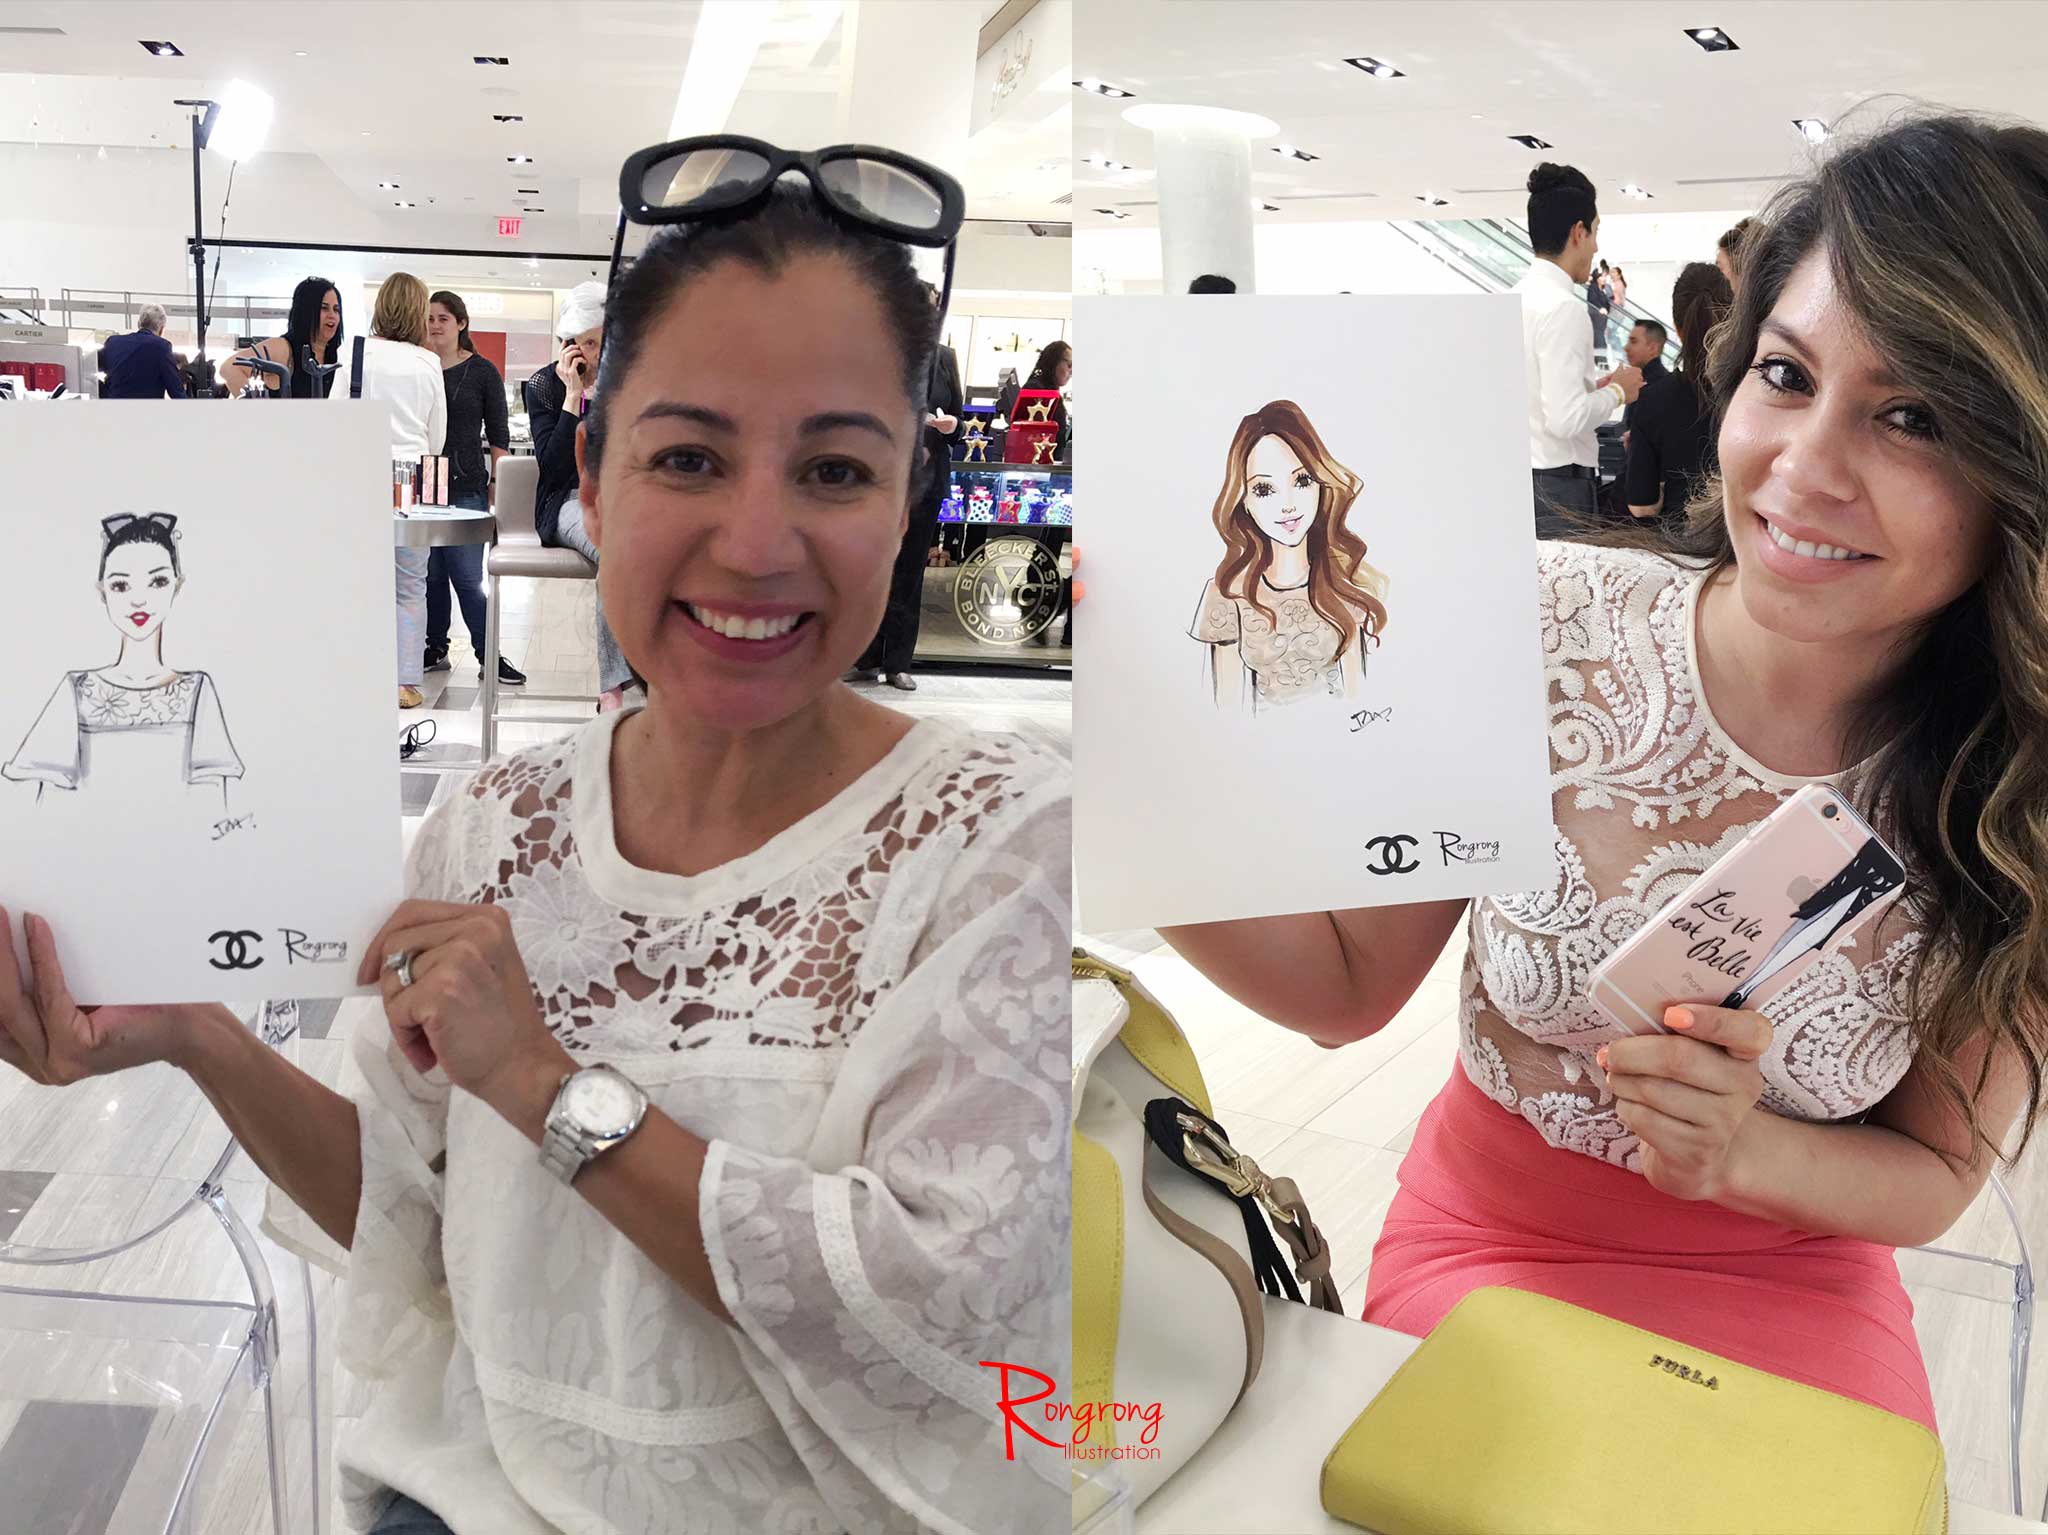 Live-sketching event for Chanel beauty by Houston fashion illustrator Rongrong DeVoe